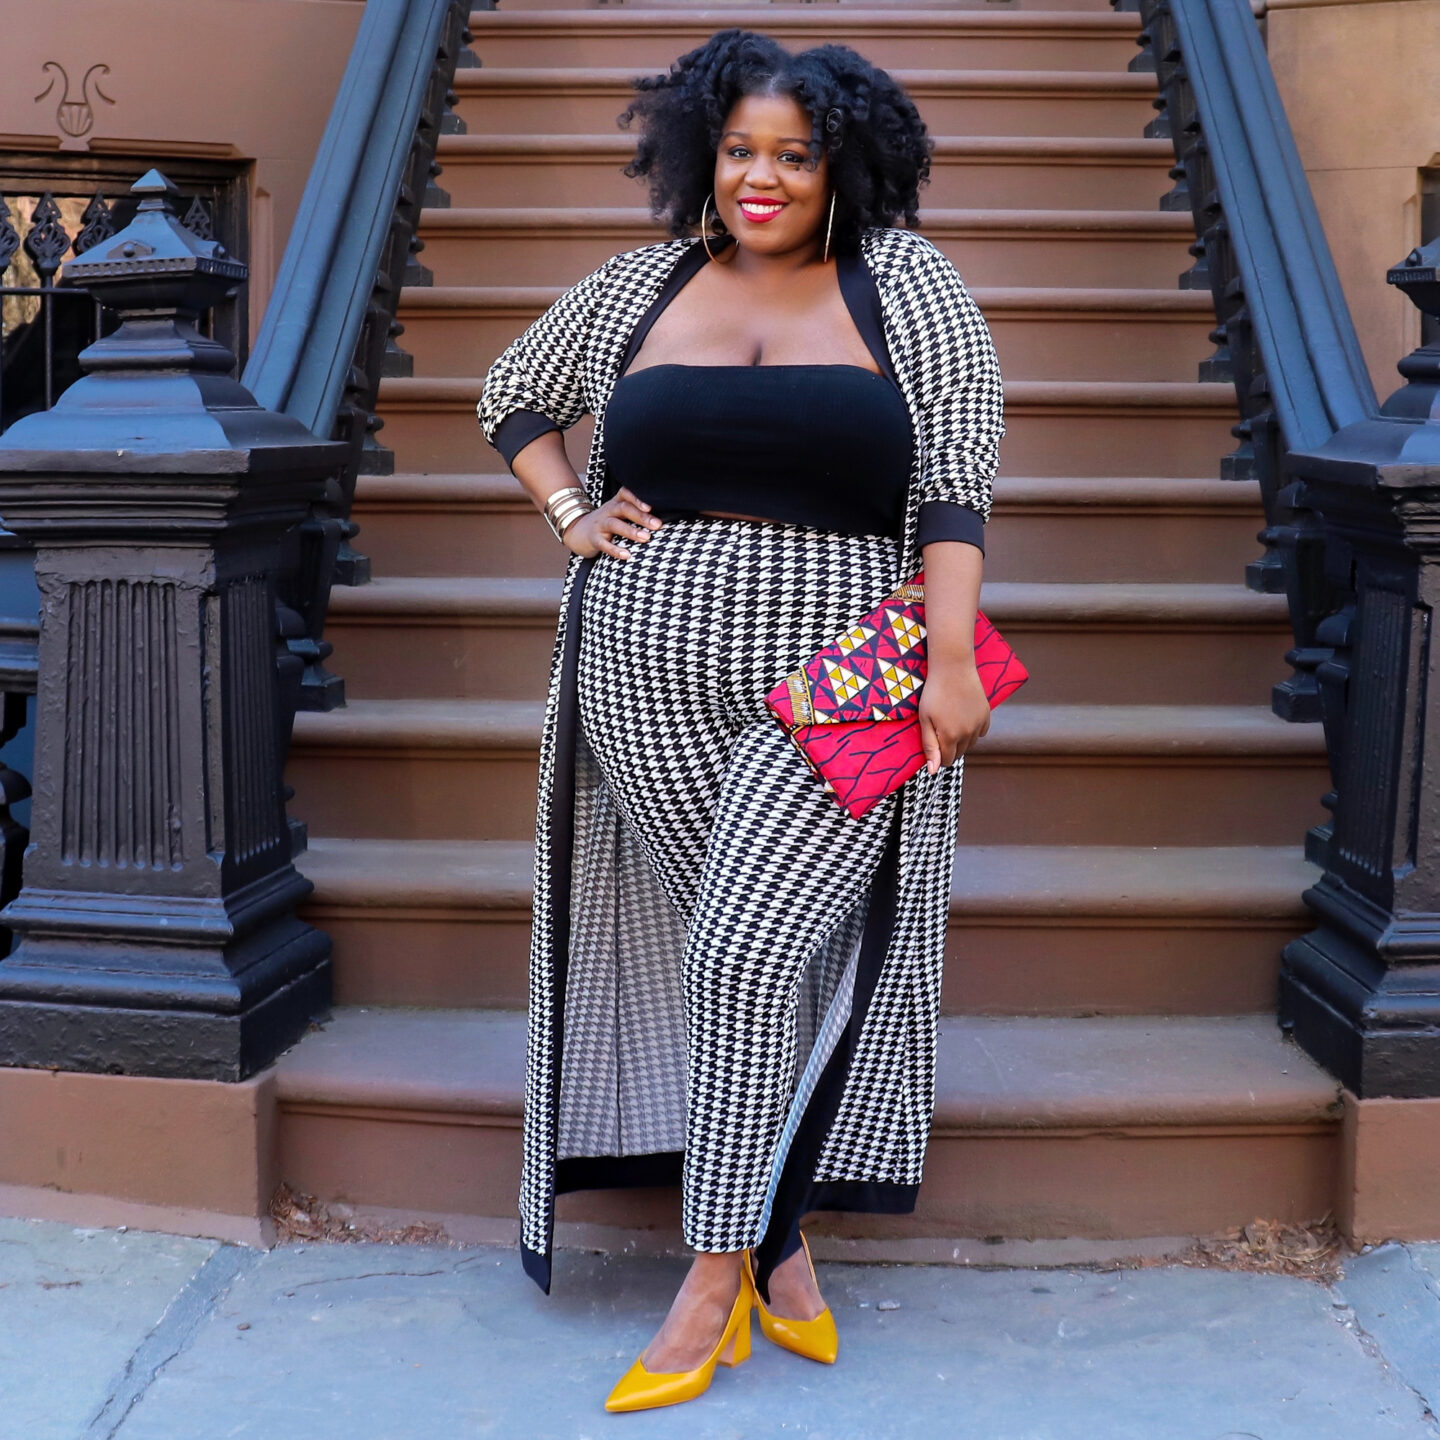 It’s All About Houndstooth! (Plus Size Edition) – On The Q Train